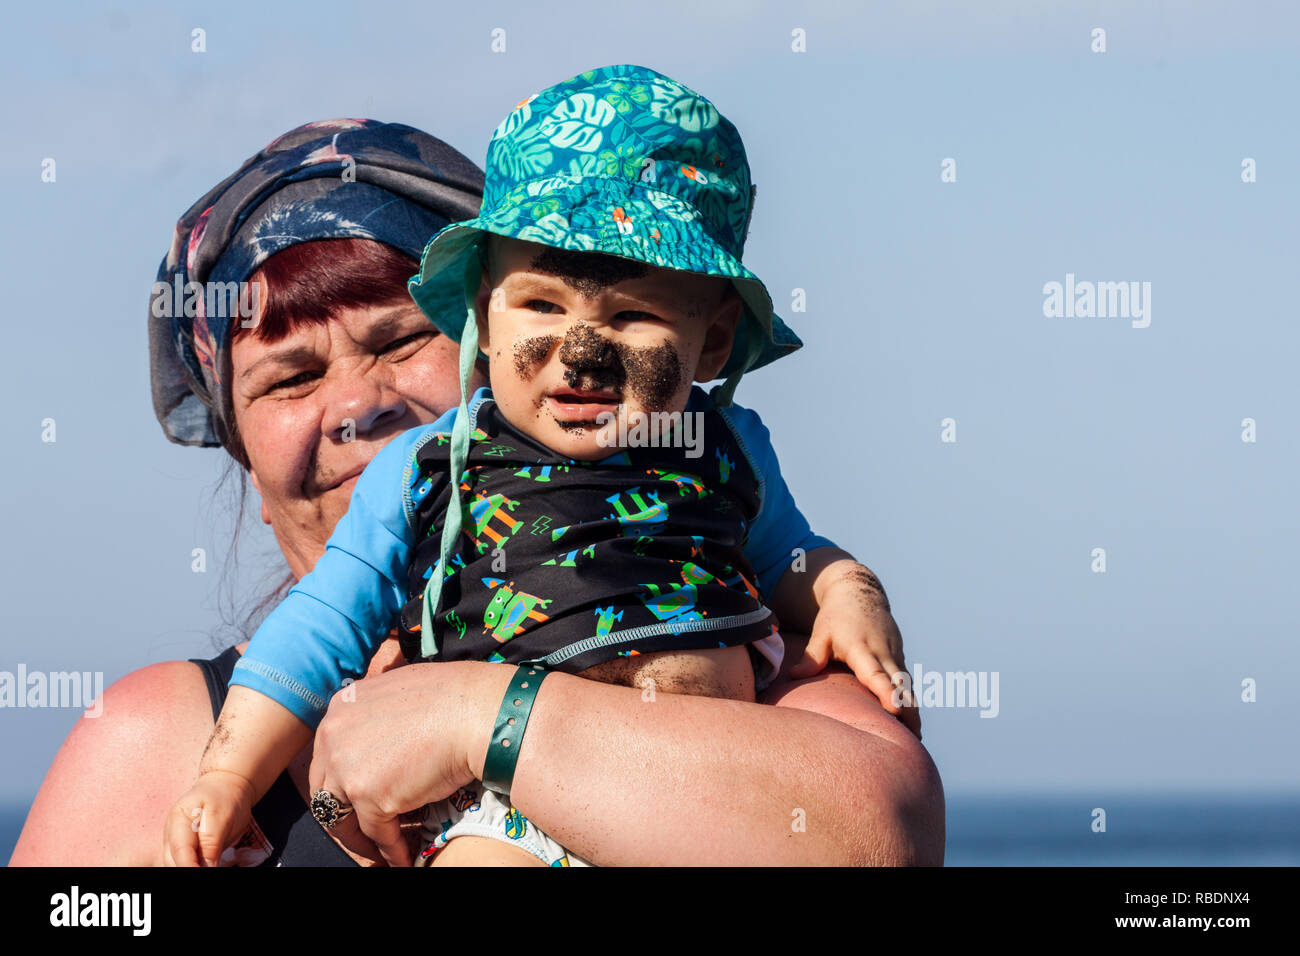 A nice photo of a grandmother holding her dirty faced grandson Stock Photo